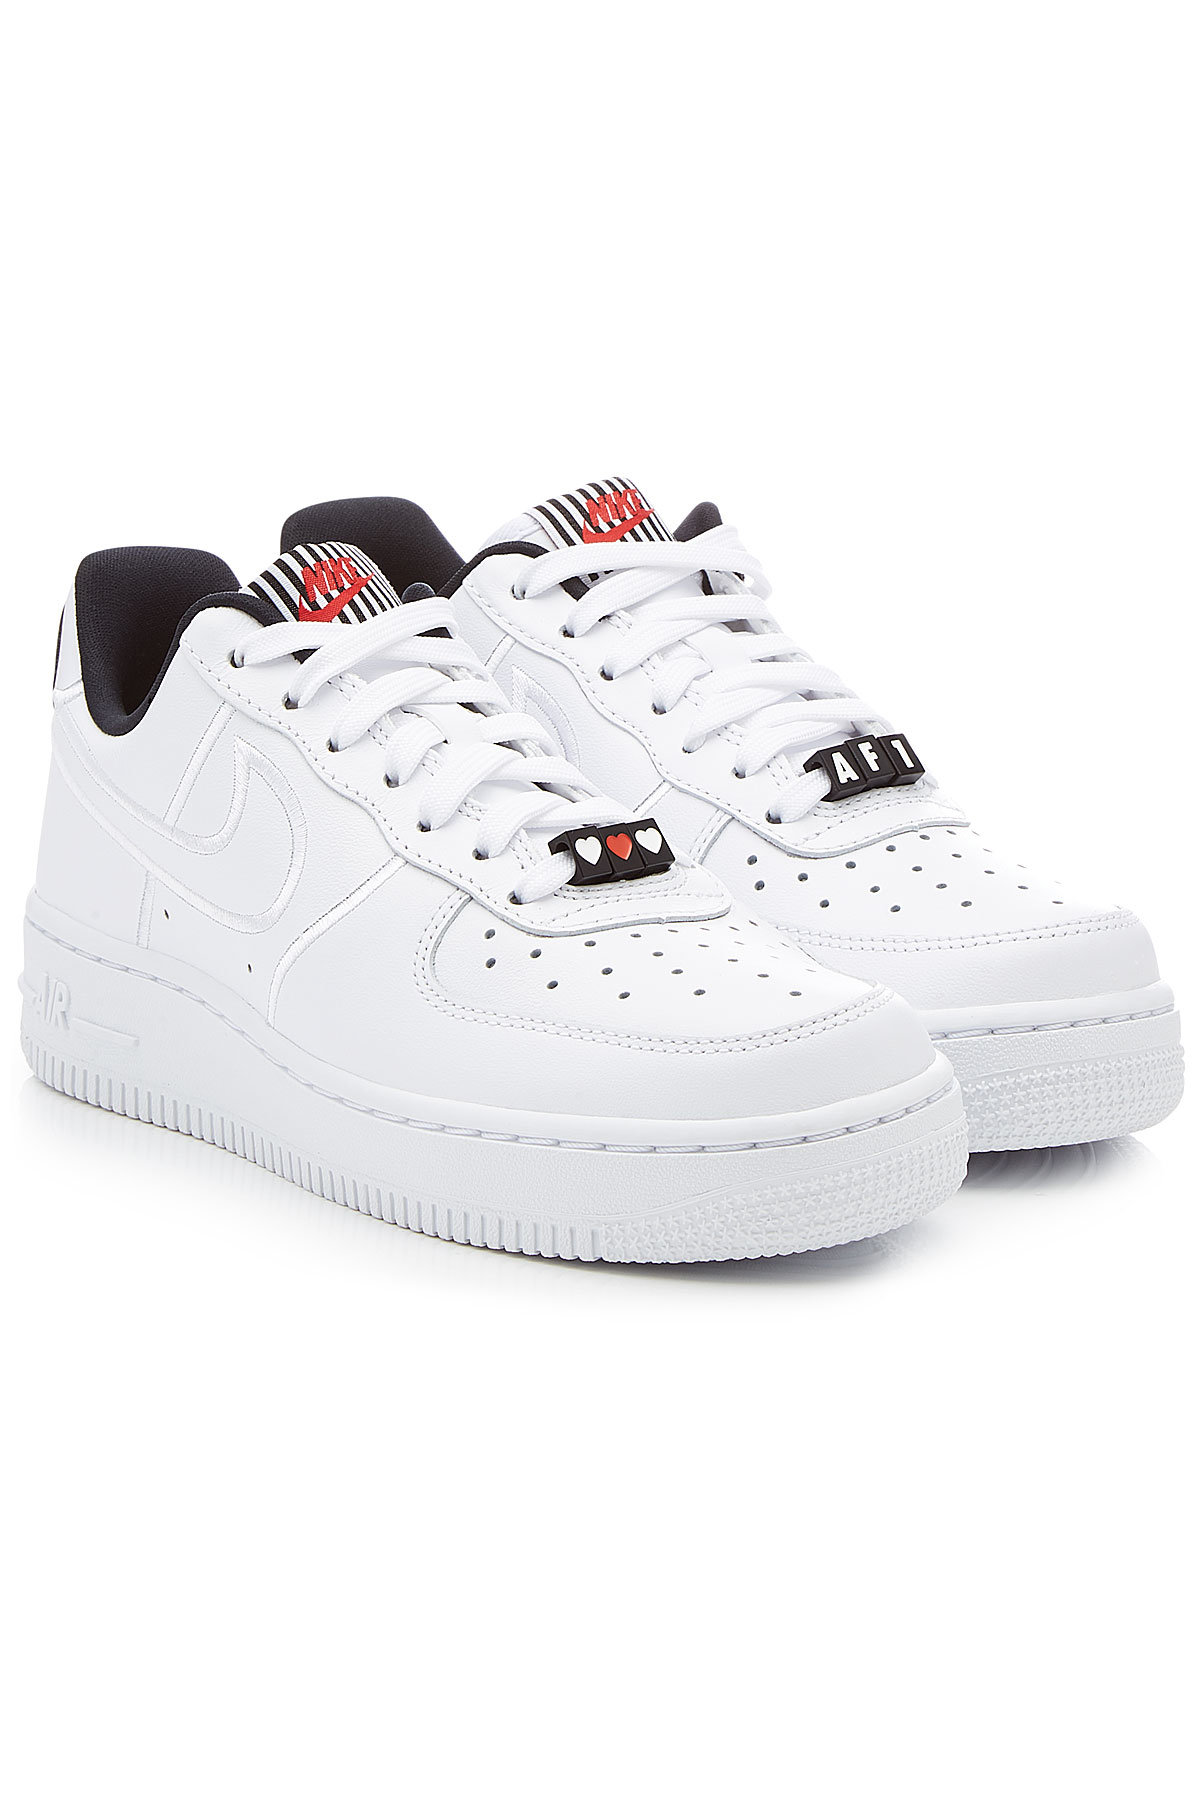 Air Force 1 Low Top Leather Sneakers by Nike